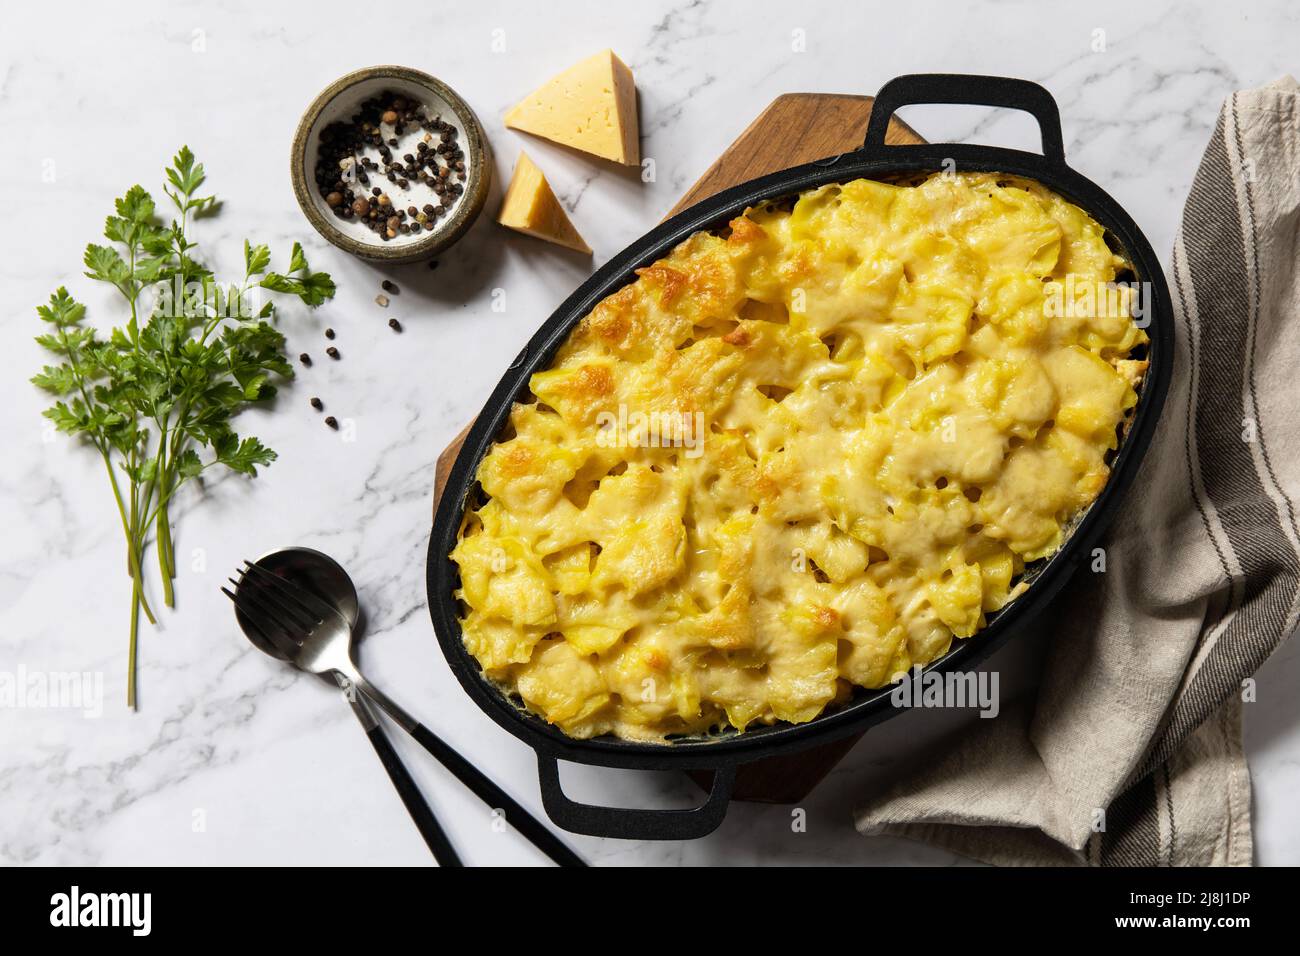 Potato gratin, french cuisine. Healthy casserole or gratin with cream, gratin dauphinois on a gray stone table. Top view flat lay. Stock Photo